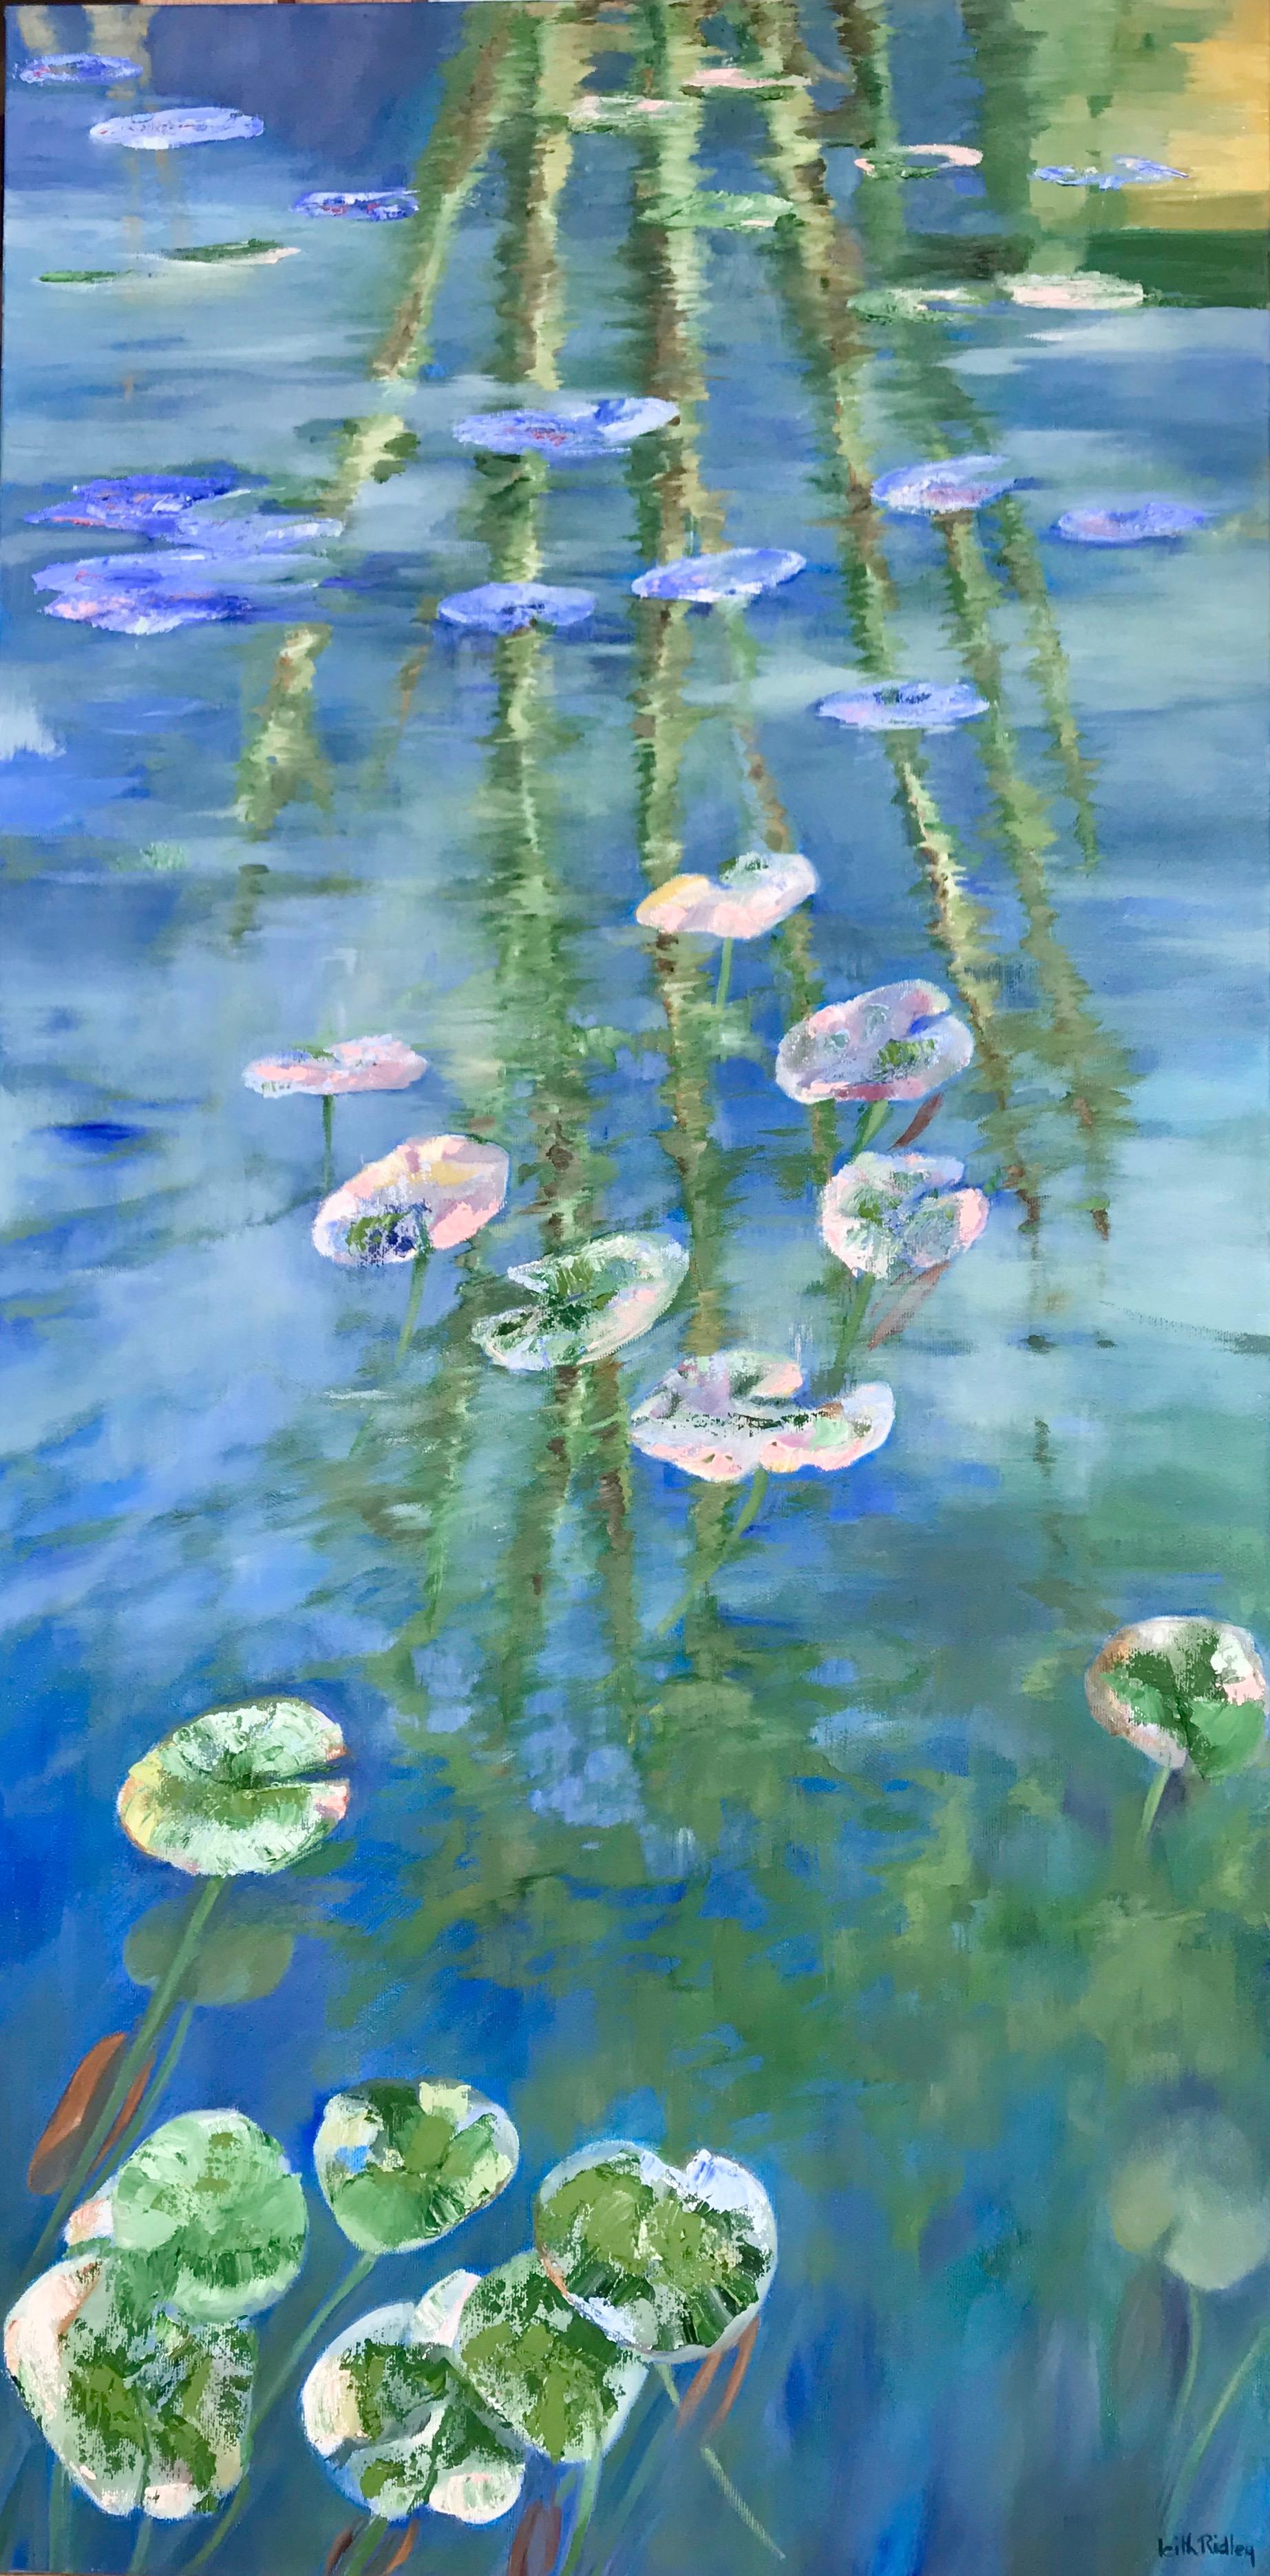 The Waterlilies - Triptych - Painting by Leith Ridley